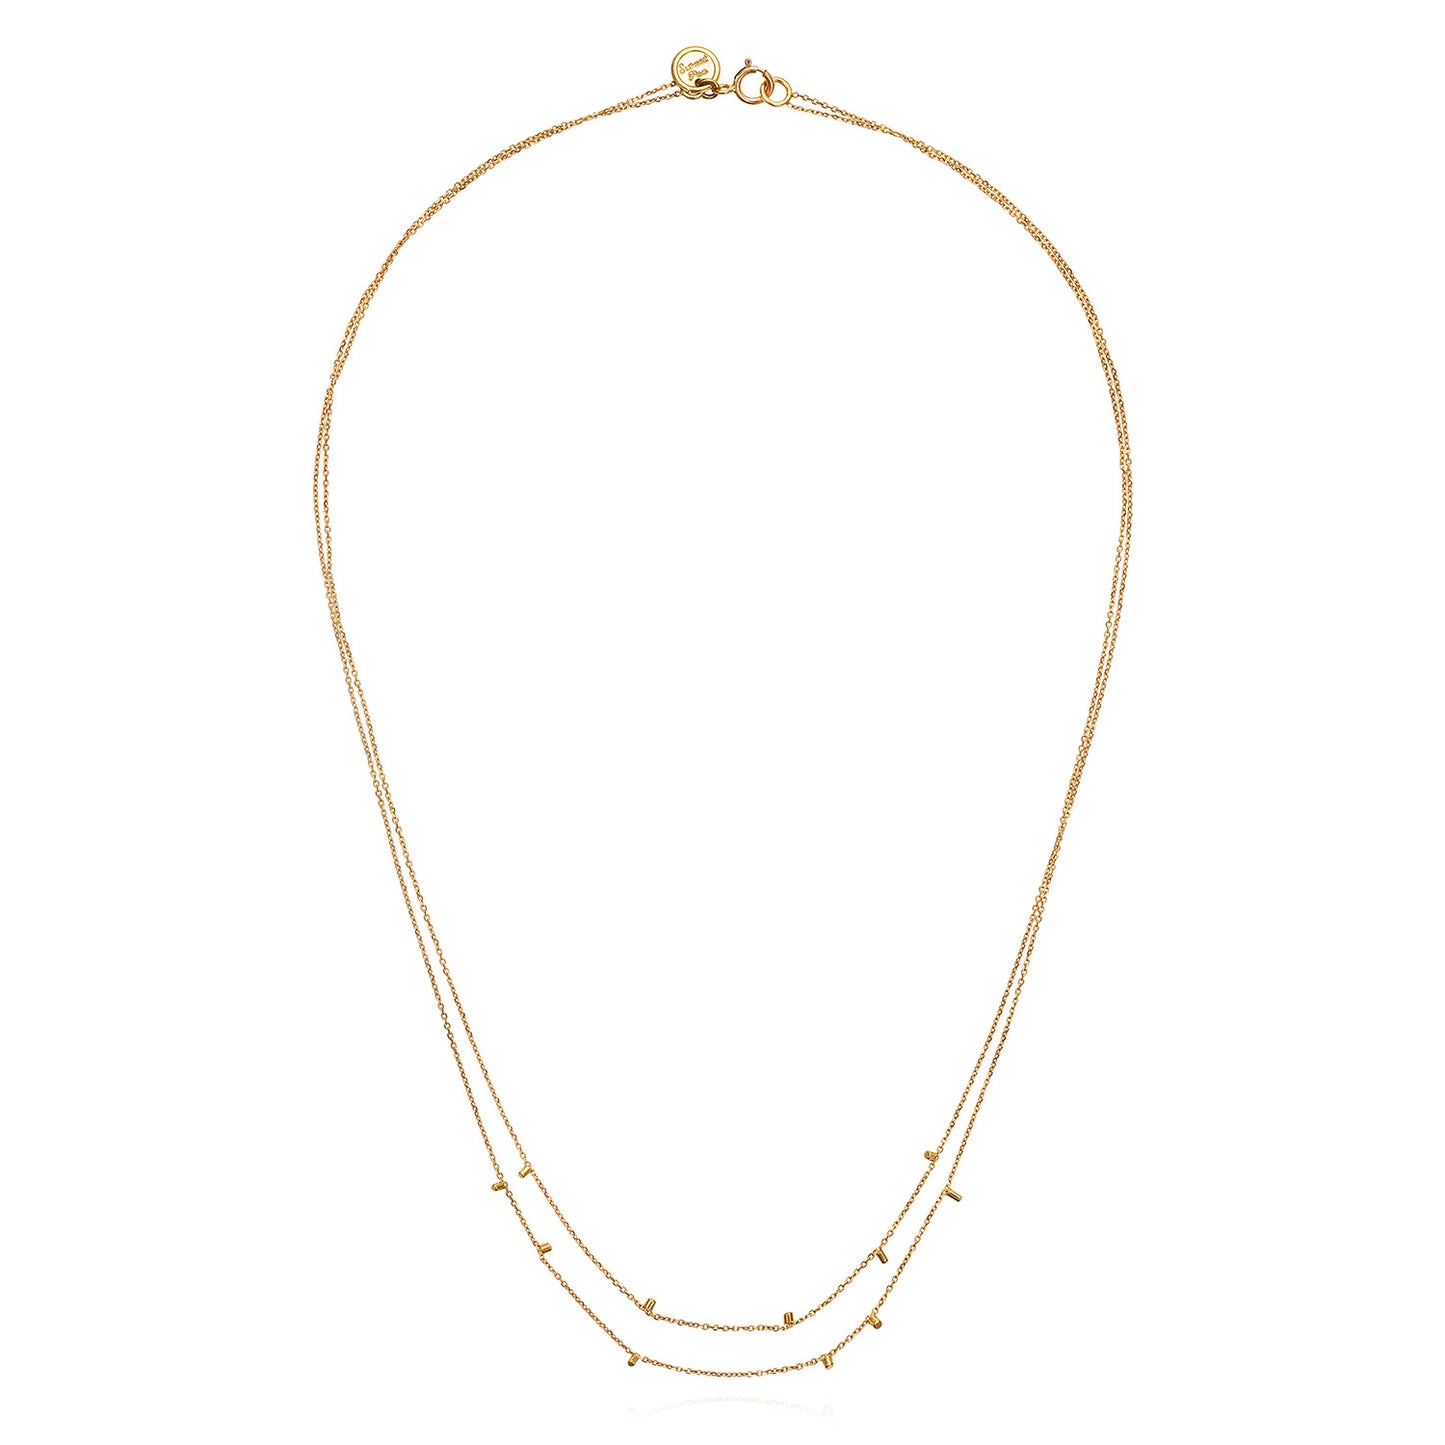 This cute 18 ct yellow double strand necklace is made of fine chain sprinkled with a shimmering of gold embellishments and is part of our Gold Dust Collection.  